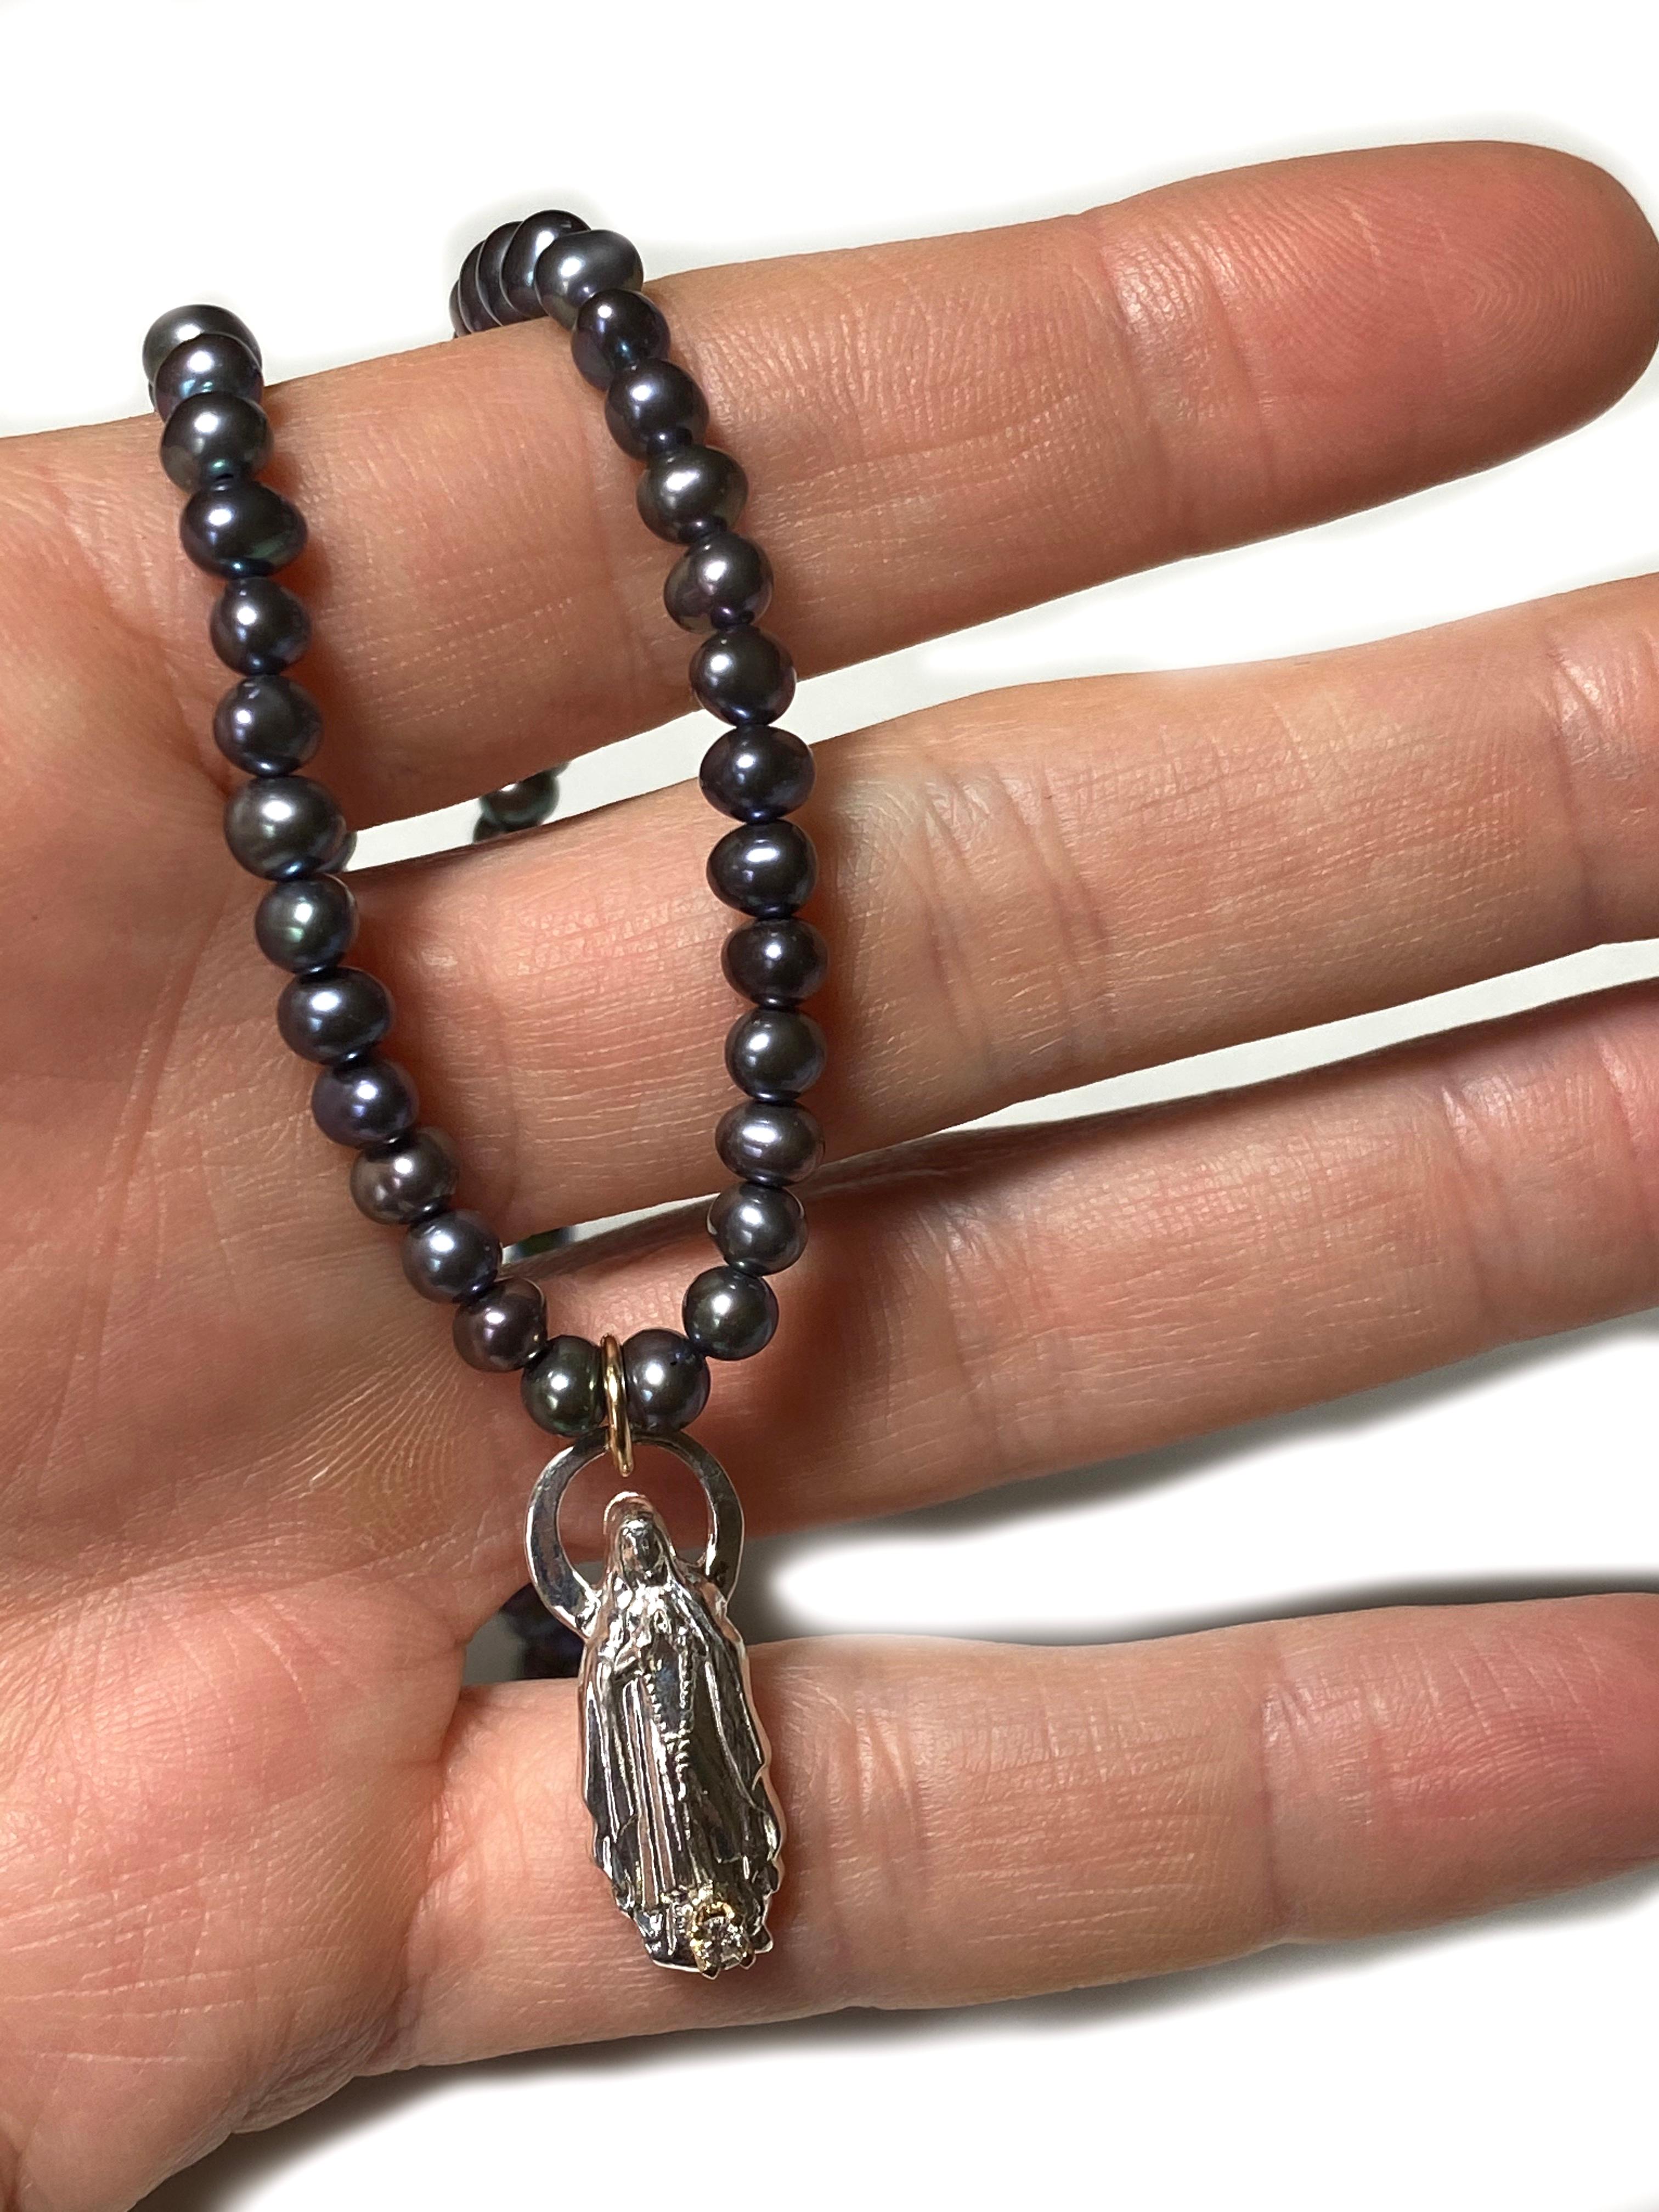 White Diamond Black Pearl Bead Necklace Virgin Mary Medal Pendant J Dauphin

Exclusive piece with Virgin Mary pendant and an White Diamond set in a gold prong on a Silver Figurine pendant. Bead Necklace is 18' long but can be made shorter or longer